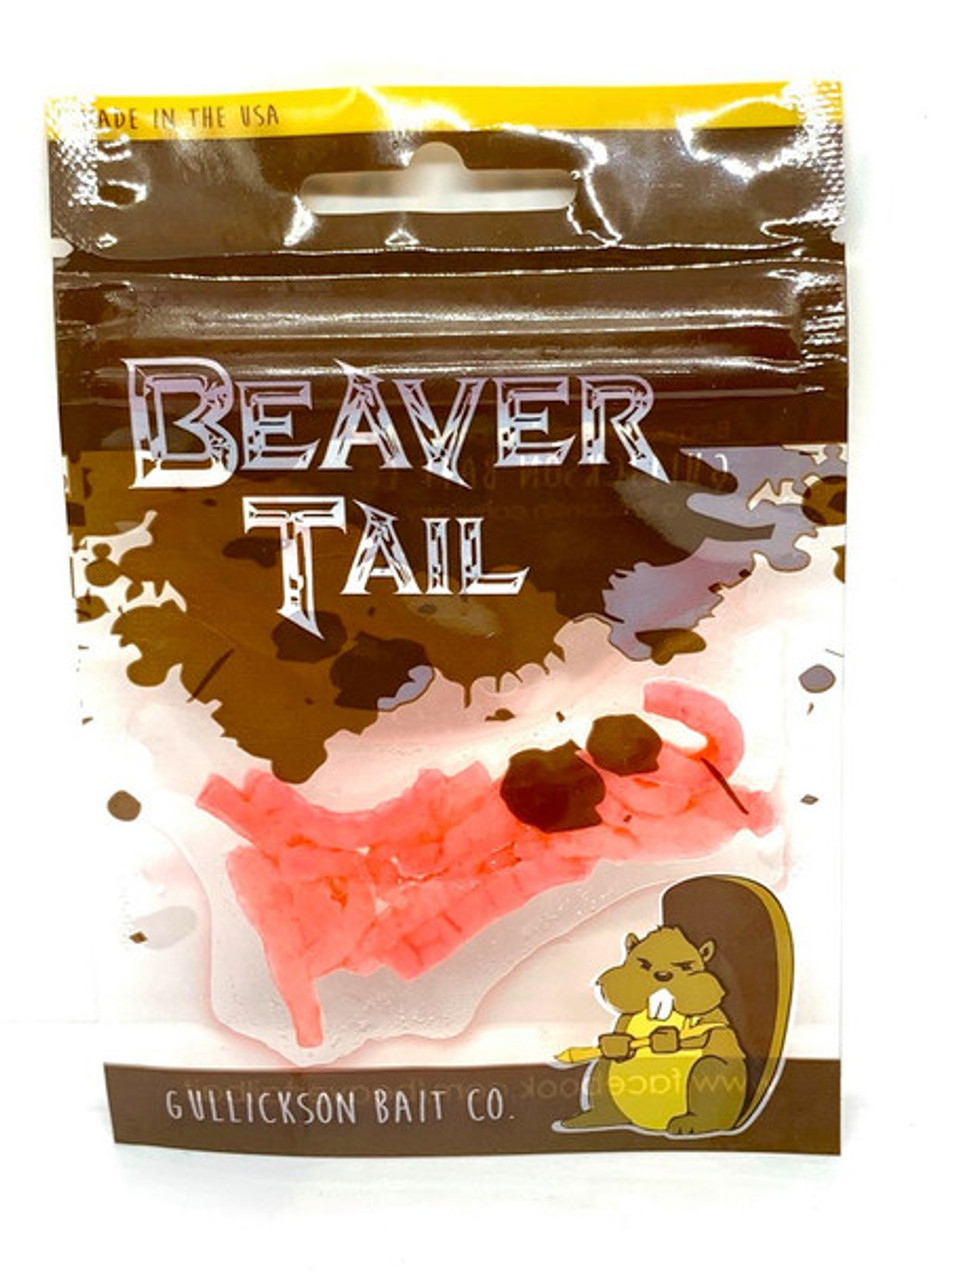 How to Cut up Beaver Tail for Fishing Bait 